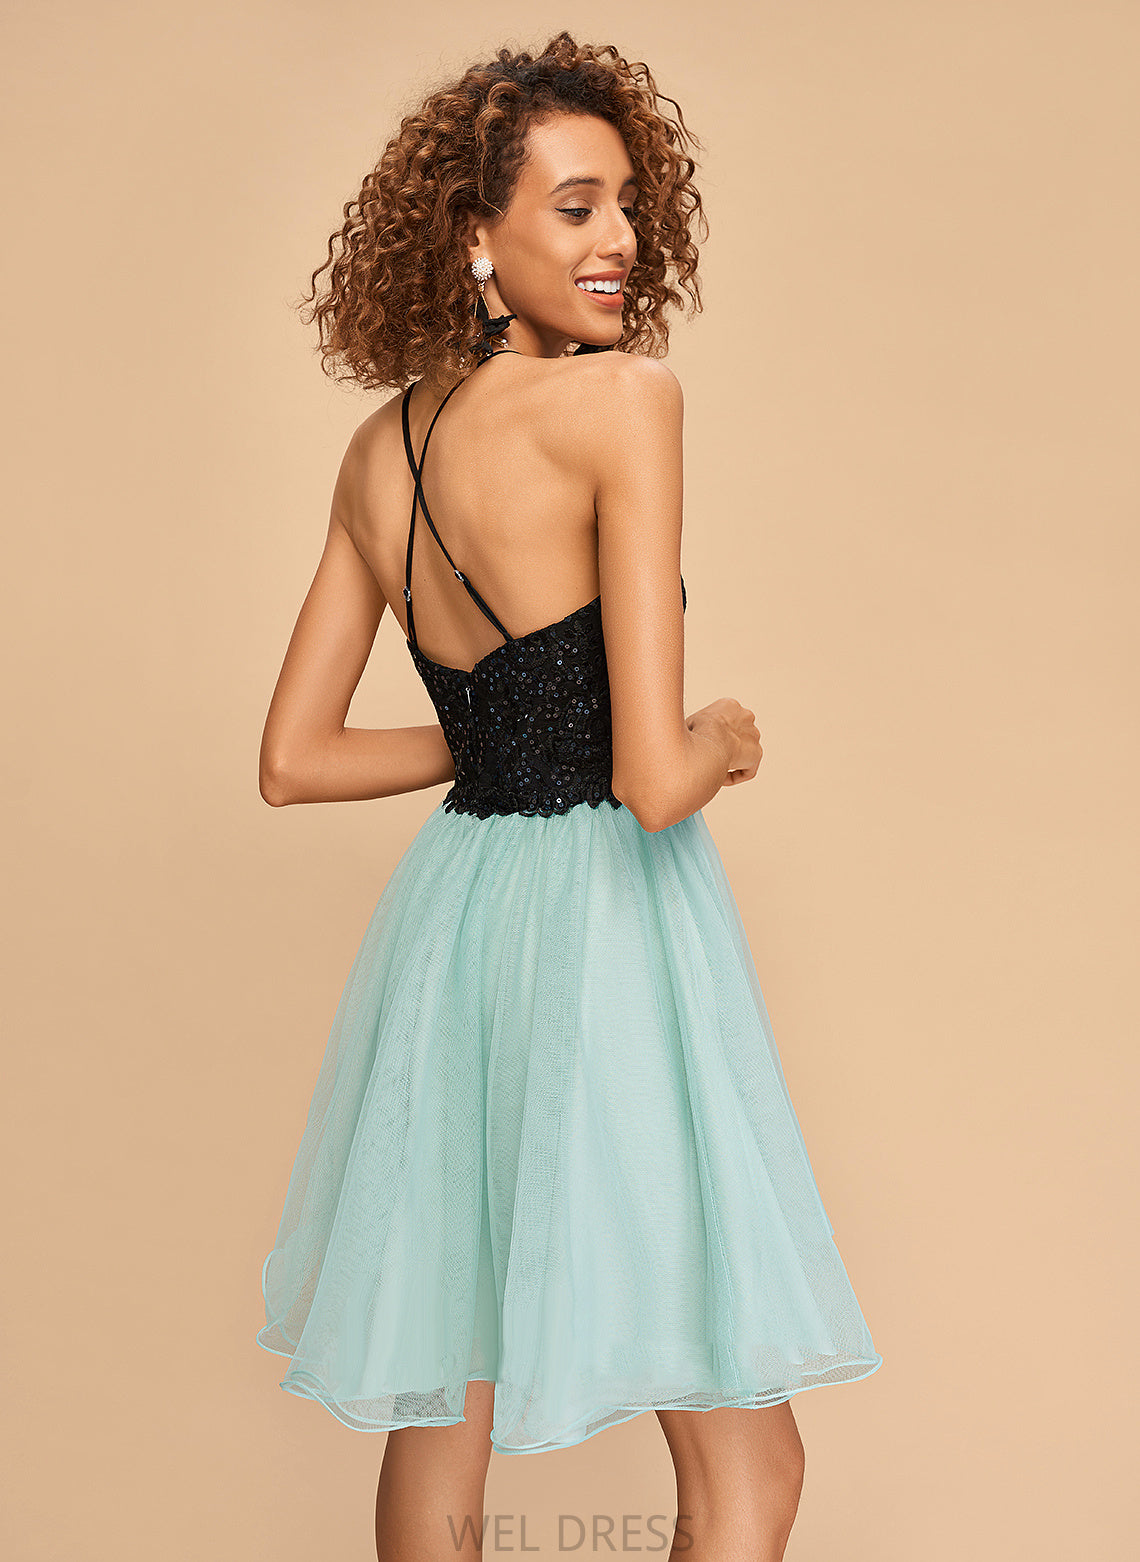 Dress Sequins With Homecoming Tianna Short/Mini Tulle Neck Scoop Homecoming Dresses A-Line